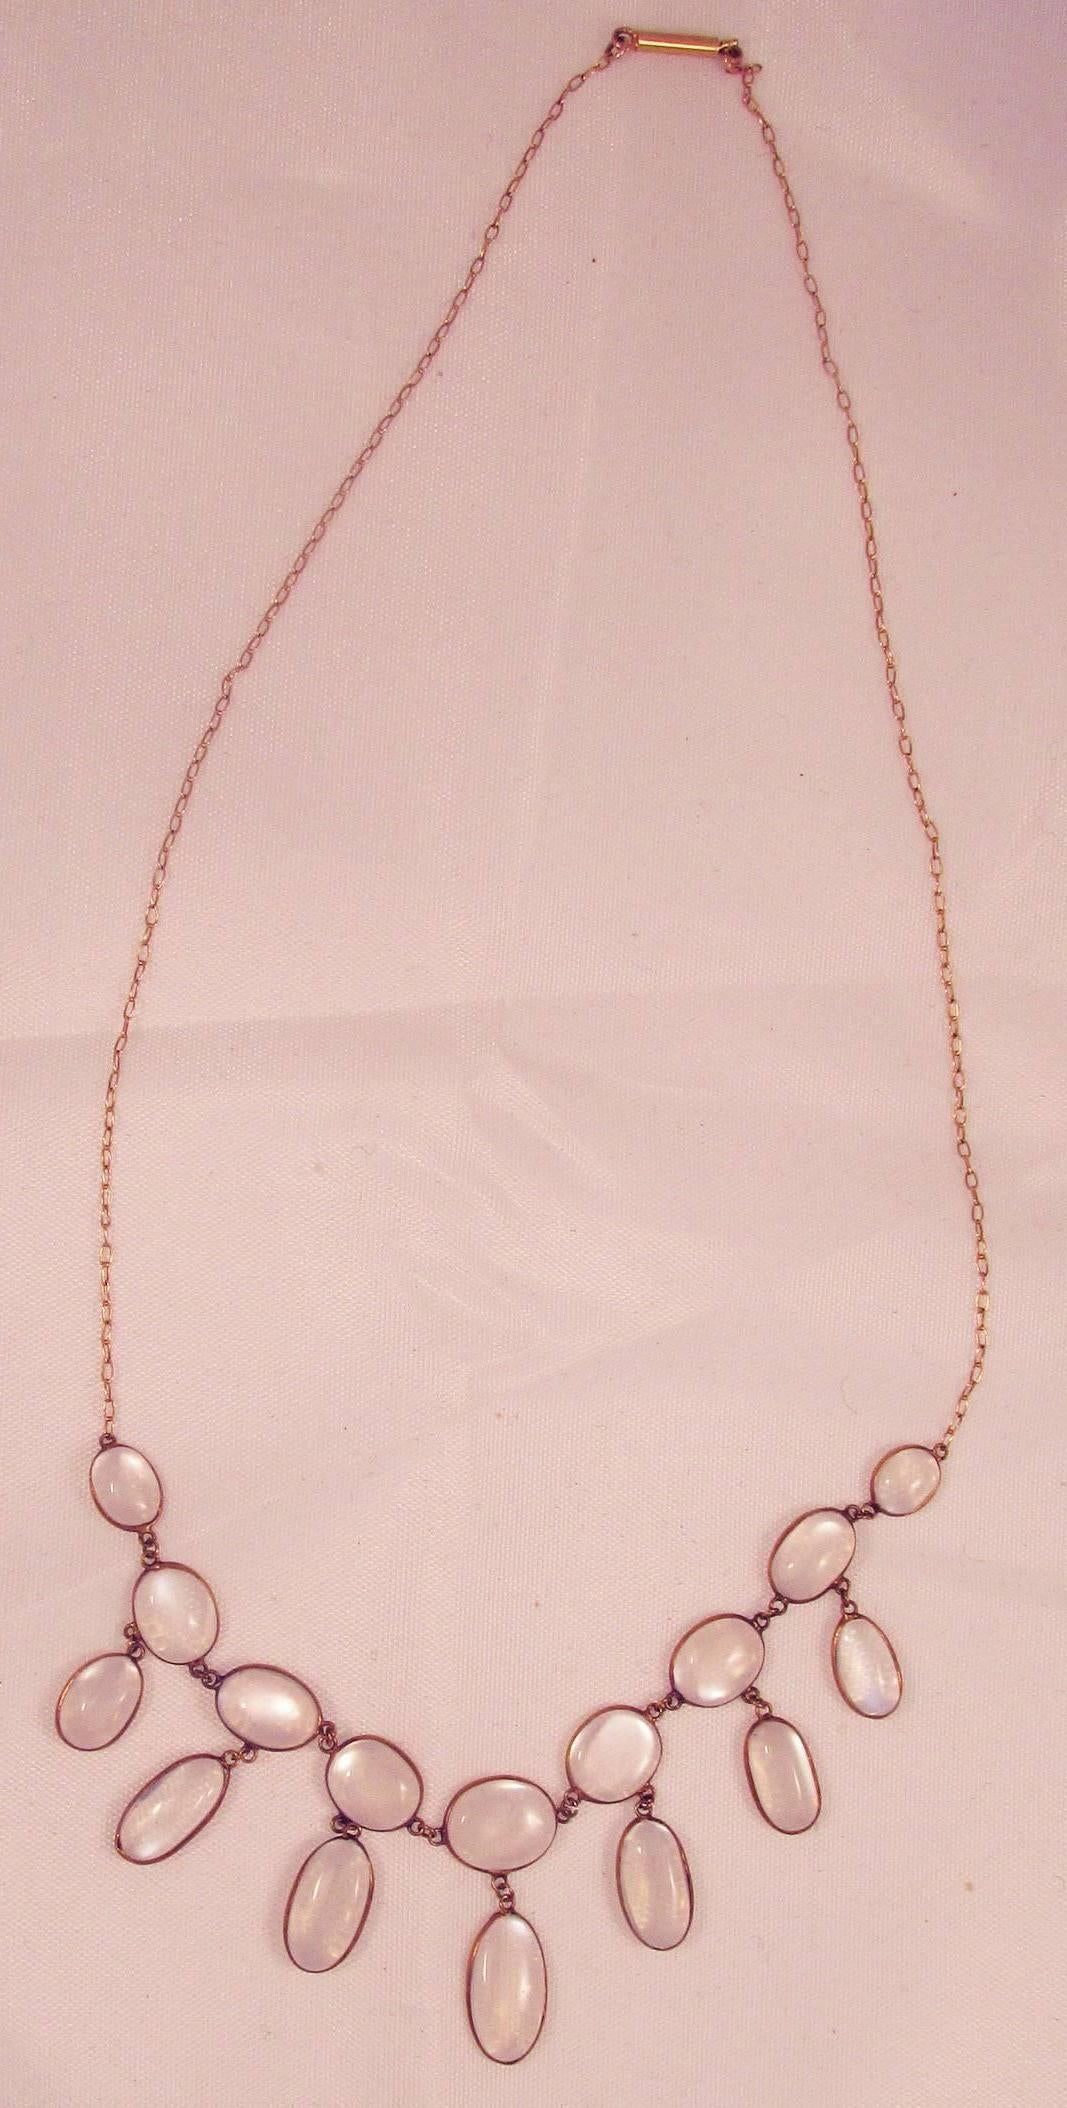 Antique Moonstone Necklace Gold  2